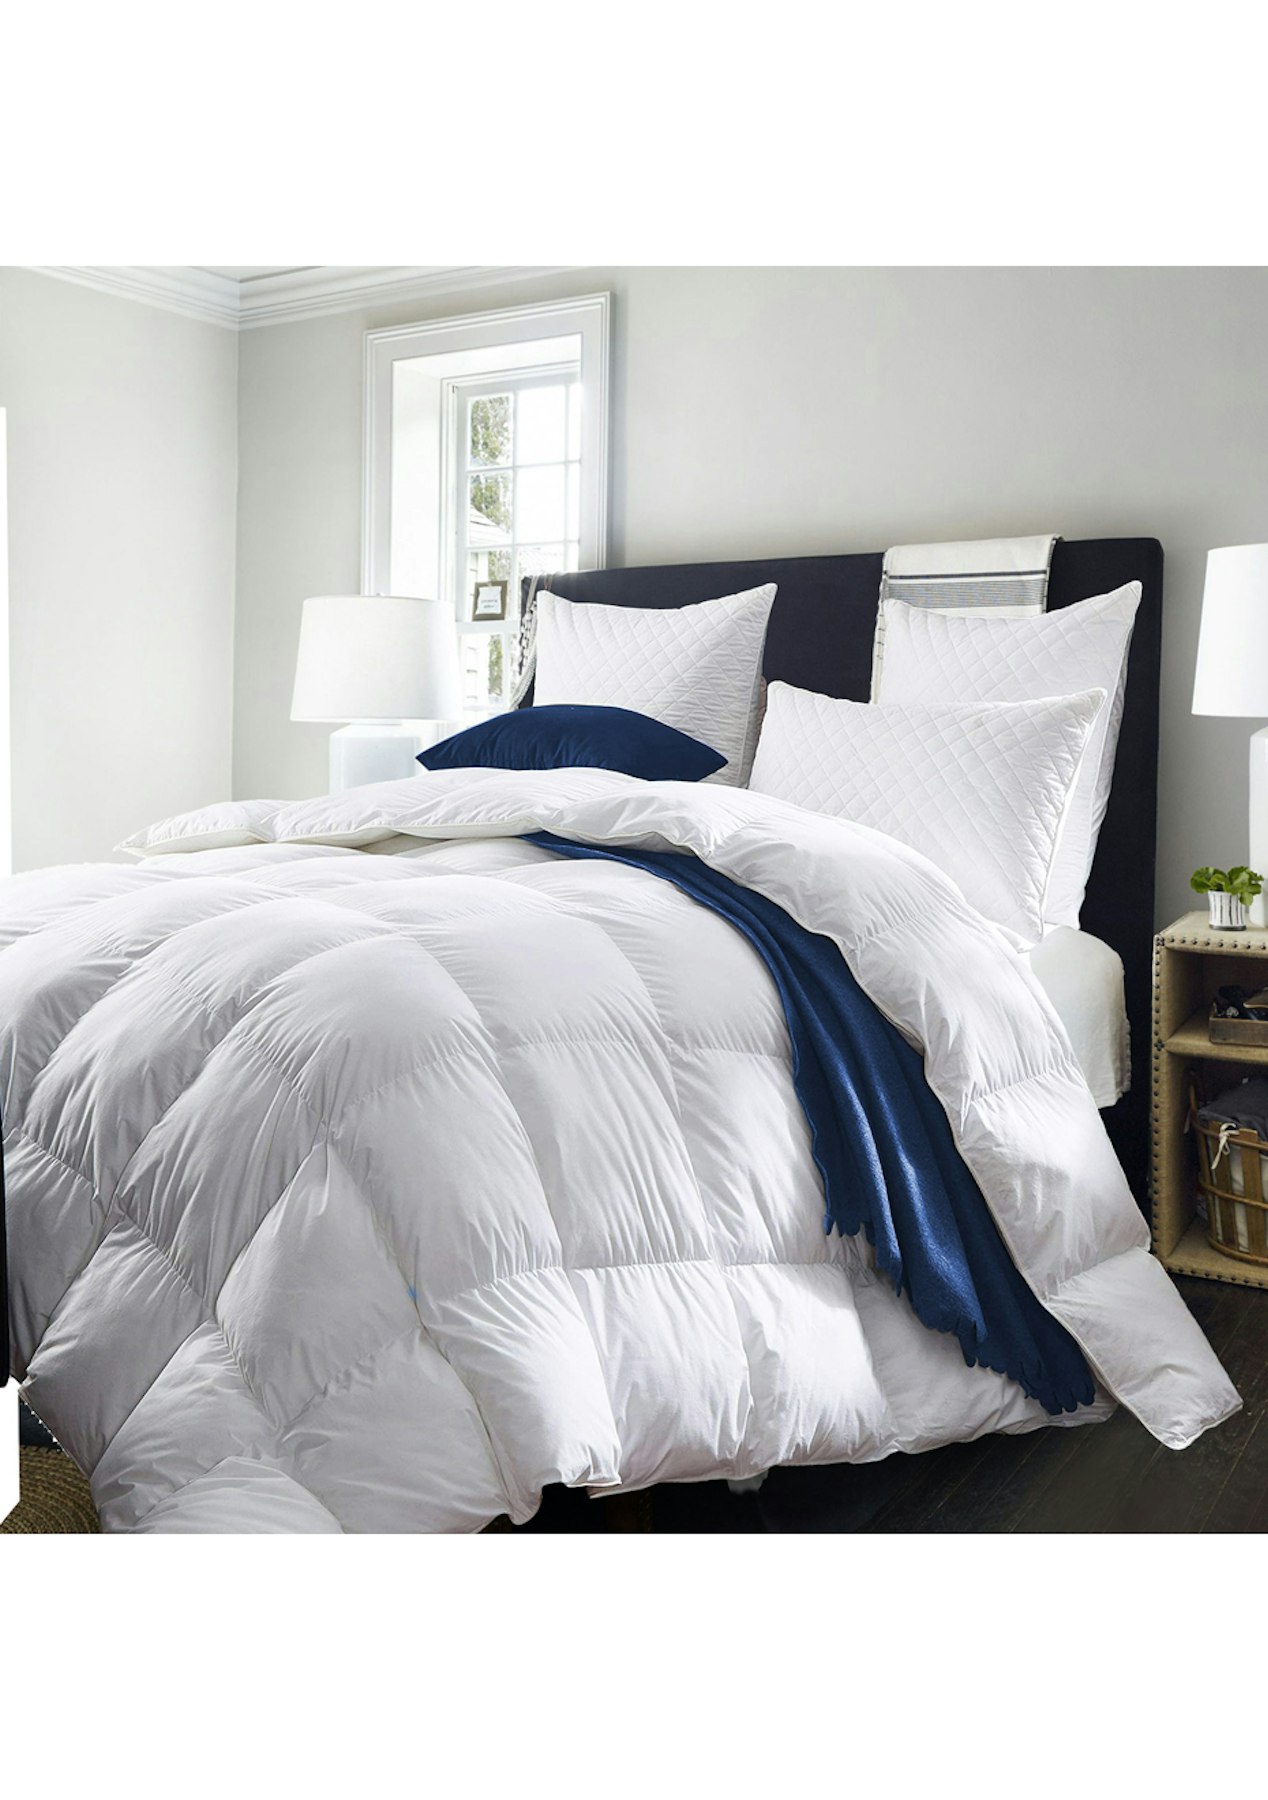 Royal Comfort 50 50 Goose Feather Down Quilt Queen Size 500gsm